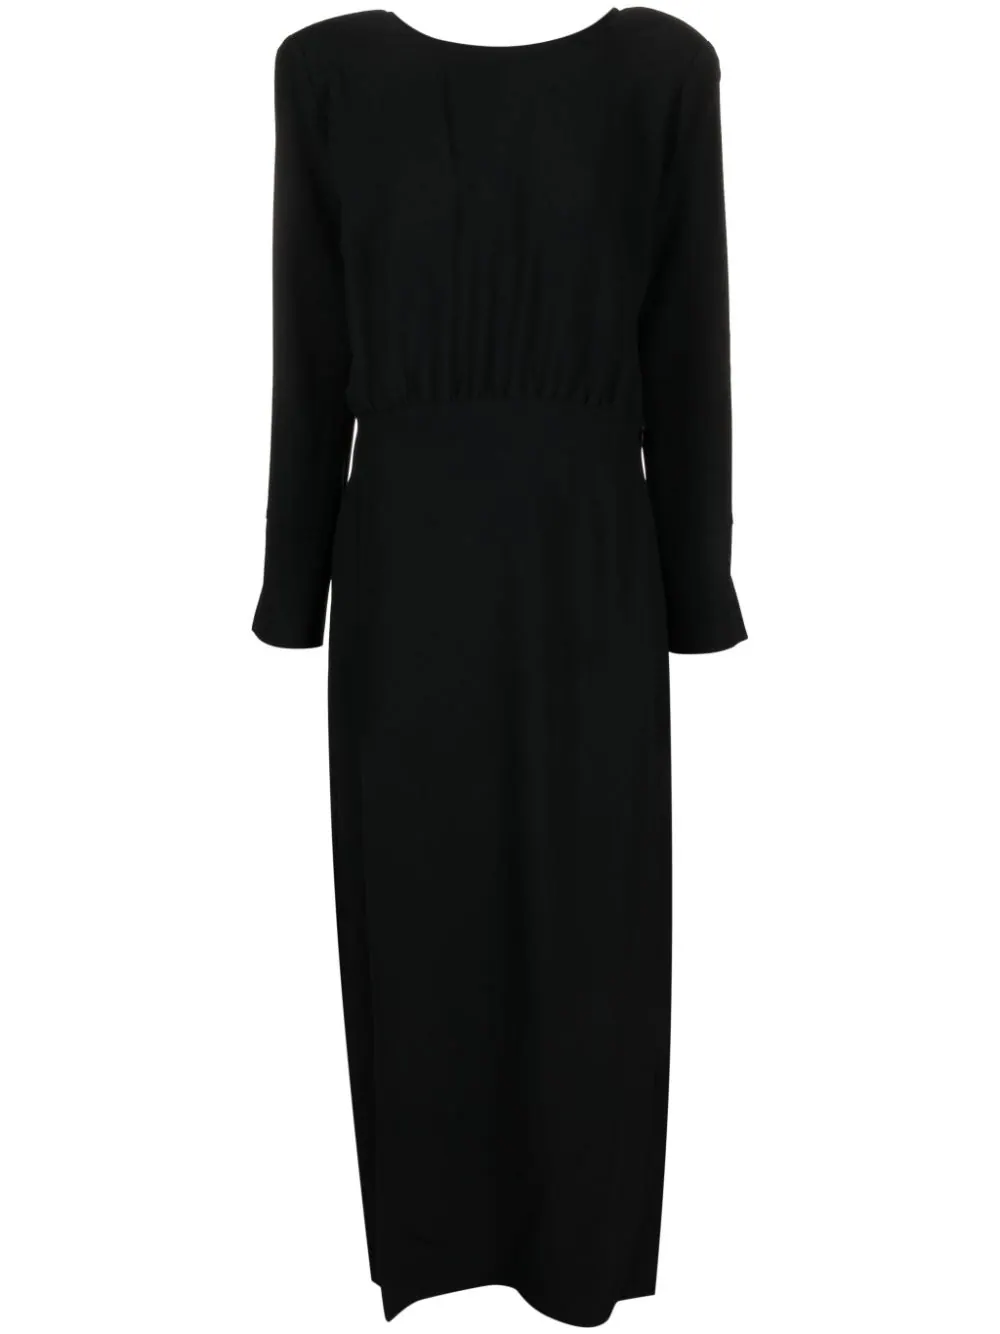 Shop Federica Tosi Dress With Back Neckline In Black